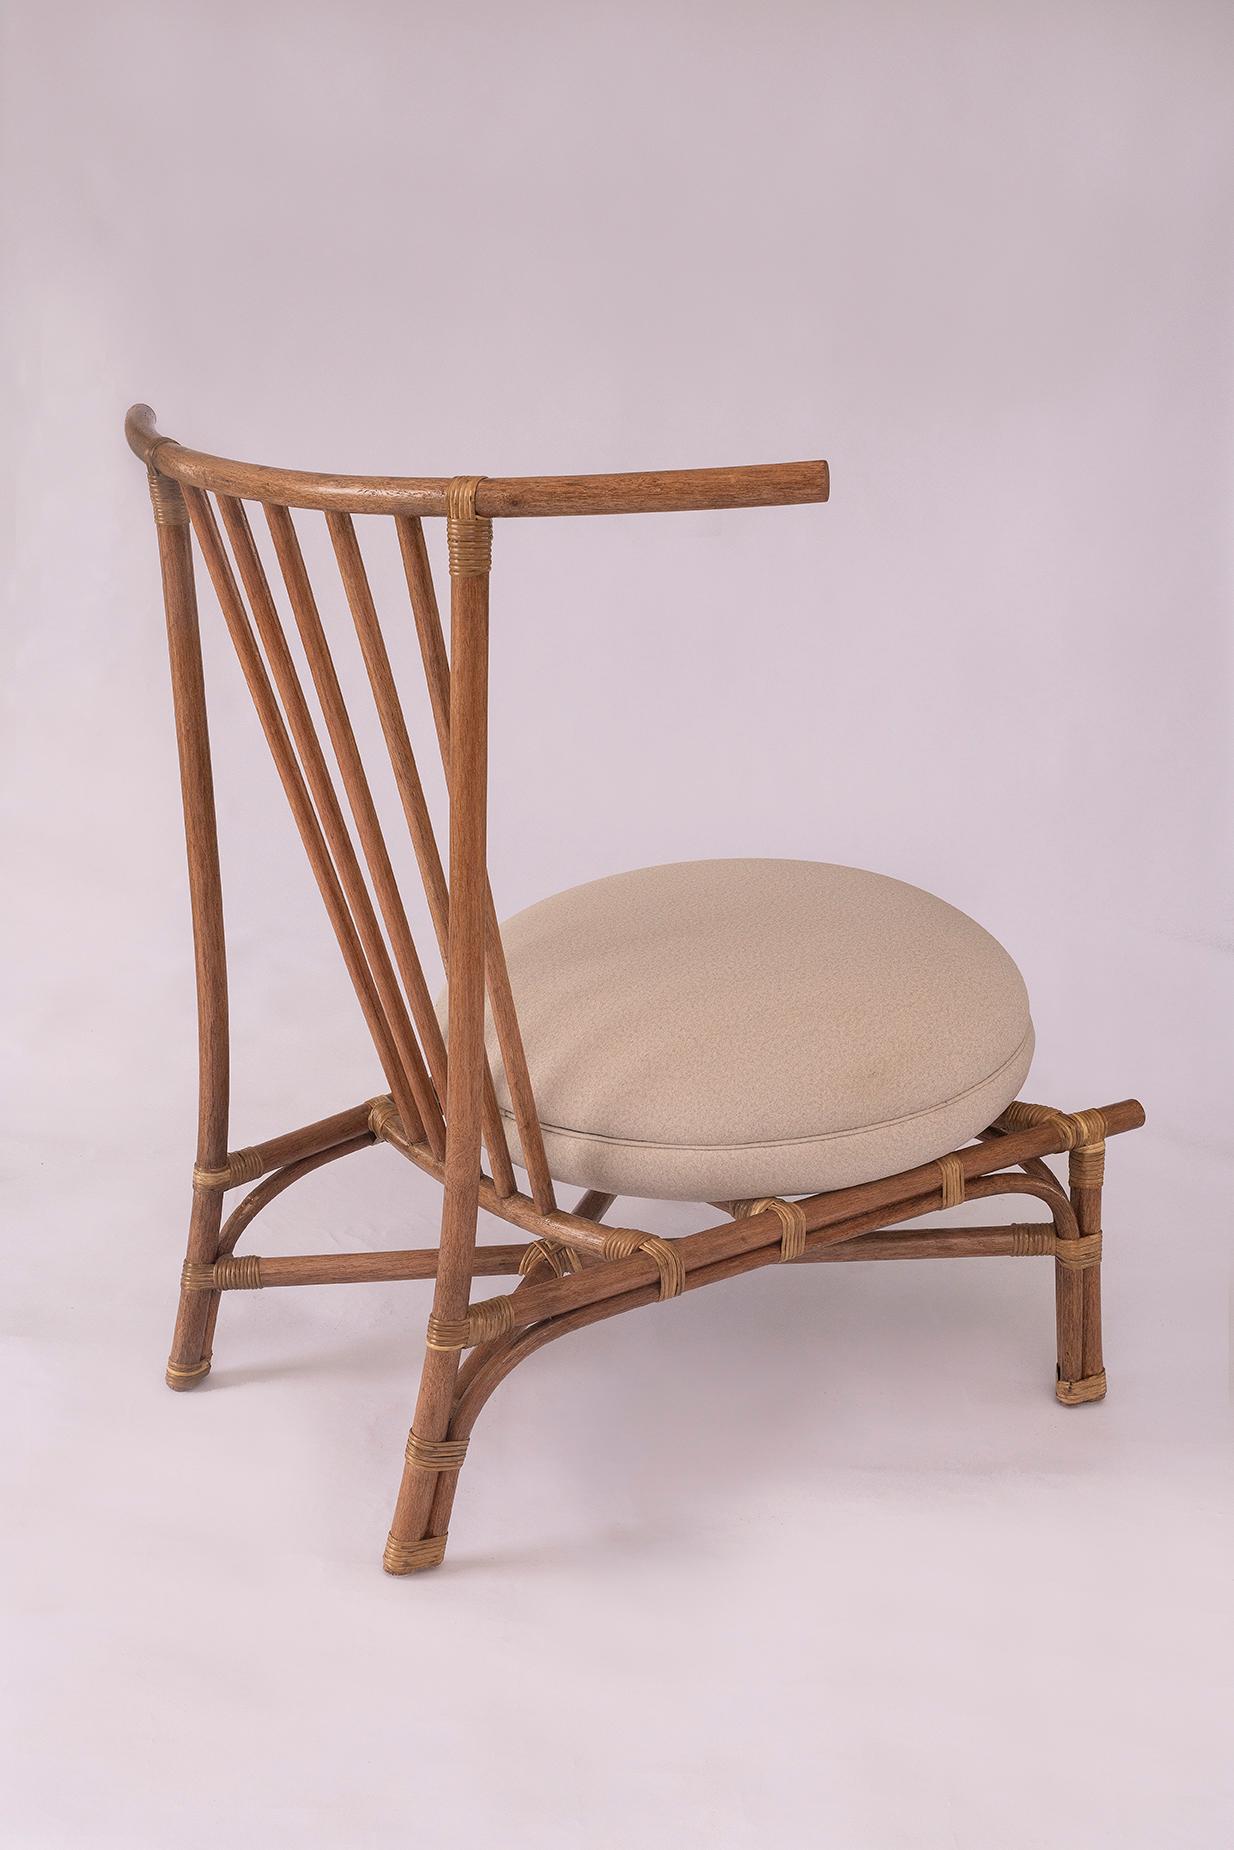 Contemporary Toro armchair made in Apuí Amazon Vine and designed by Tiago Curioni For Sale